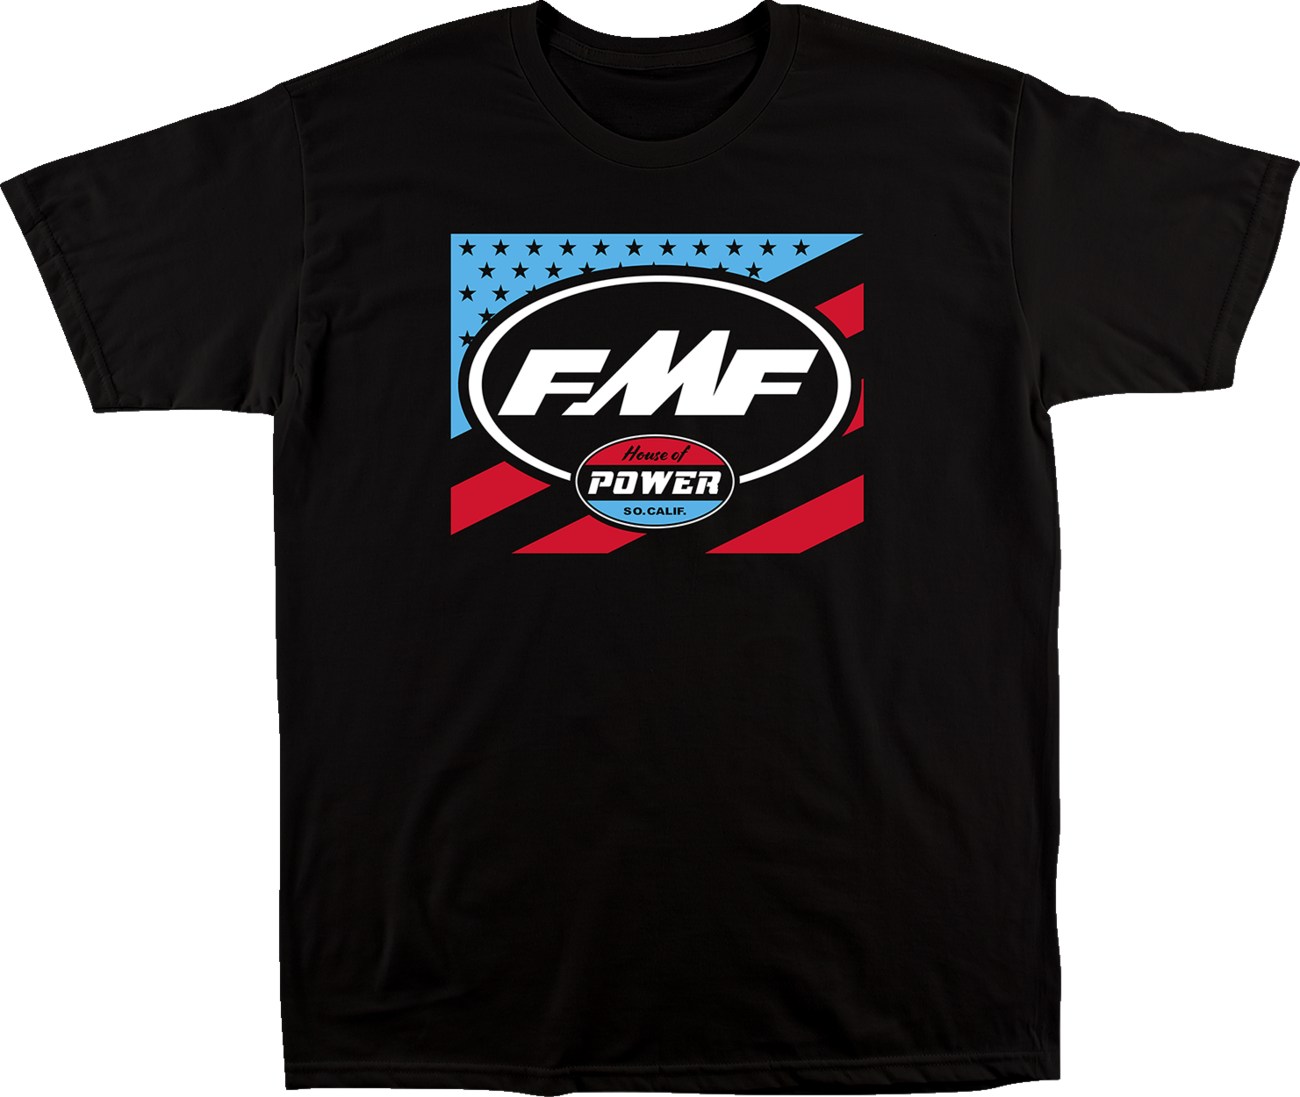 FMF House of Freedom T-Shirt - Black - Small SP22118904BKS 3030-21866